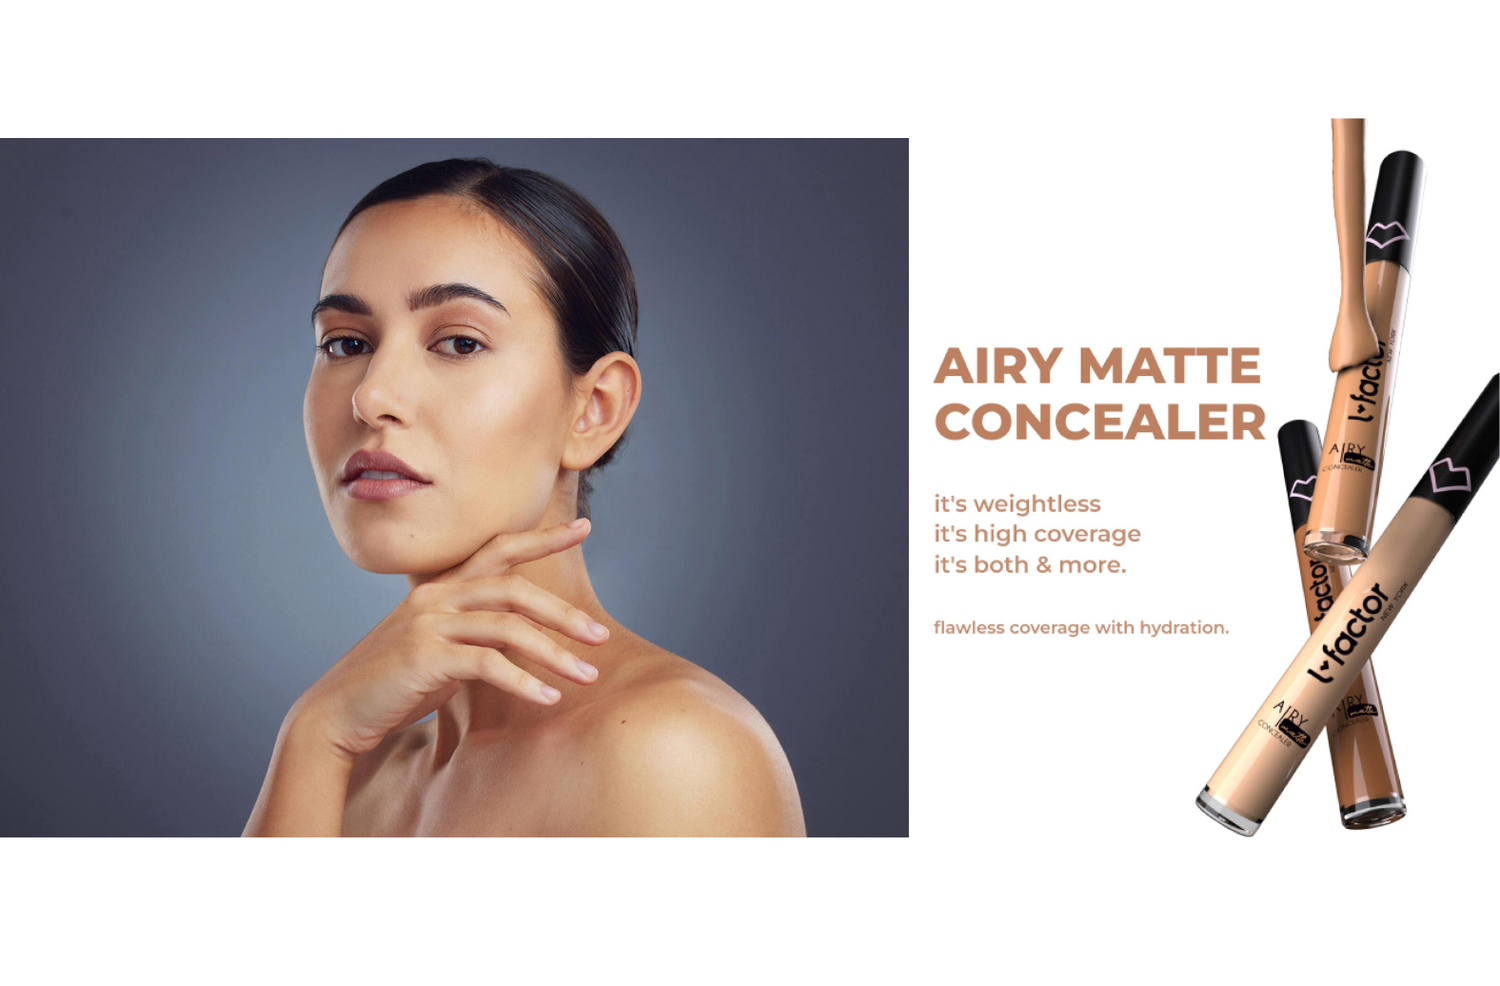 Concealer Use in Makeup: Why Concealer is a Makeup Must-Have?